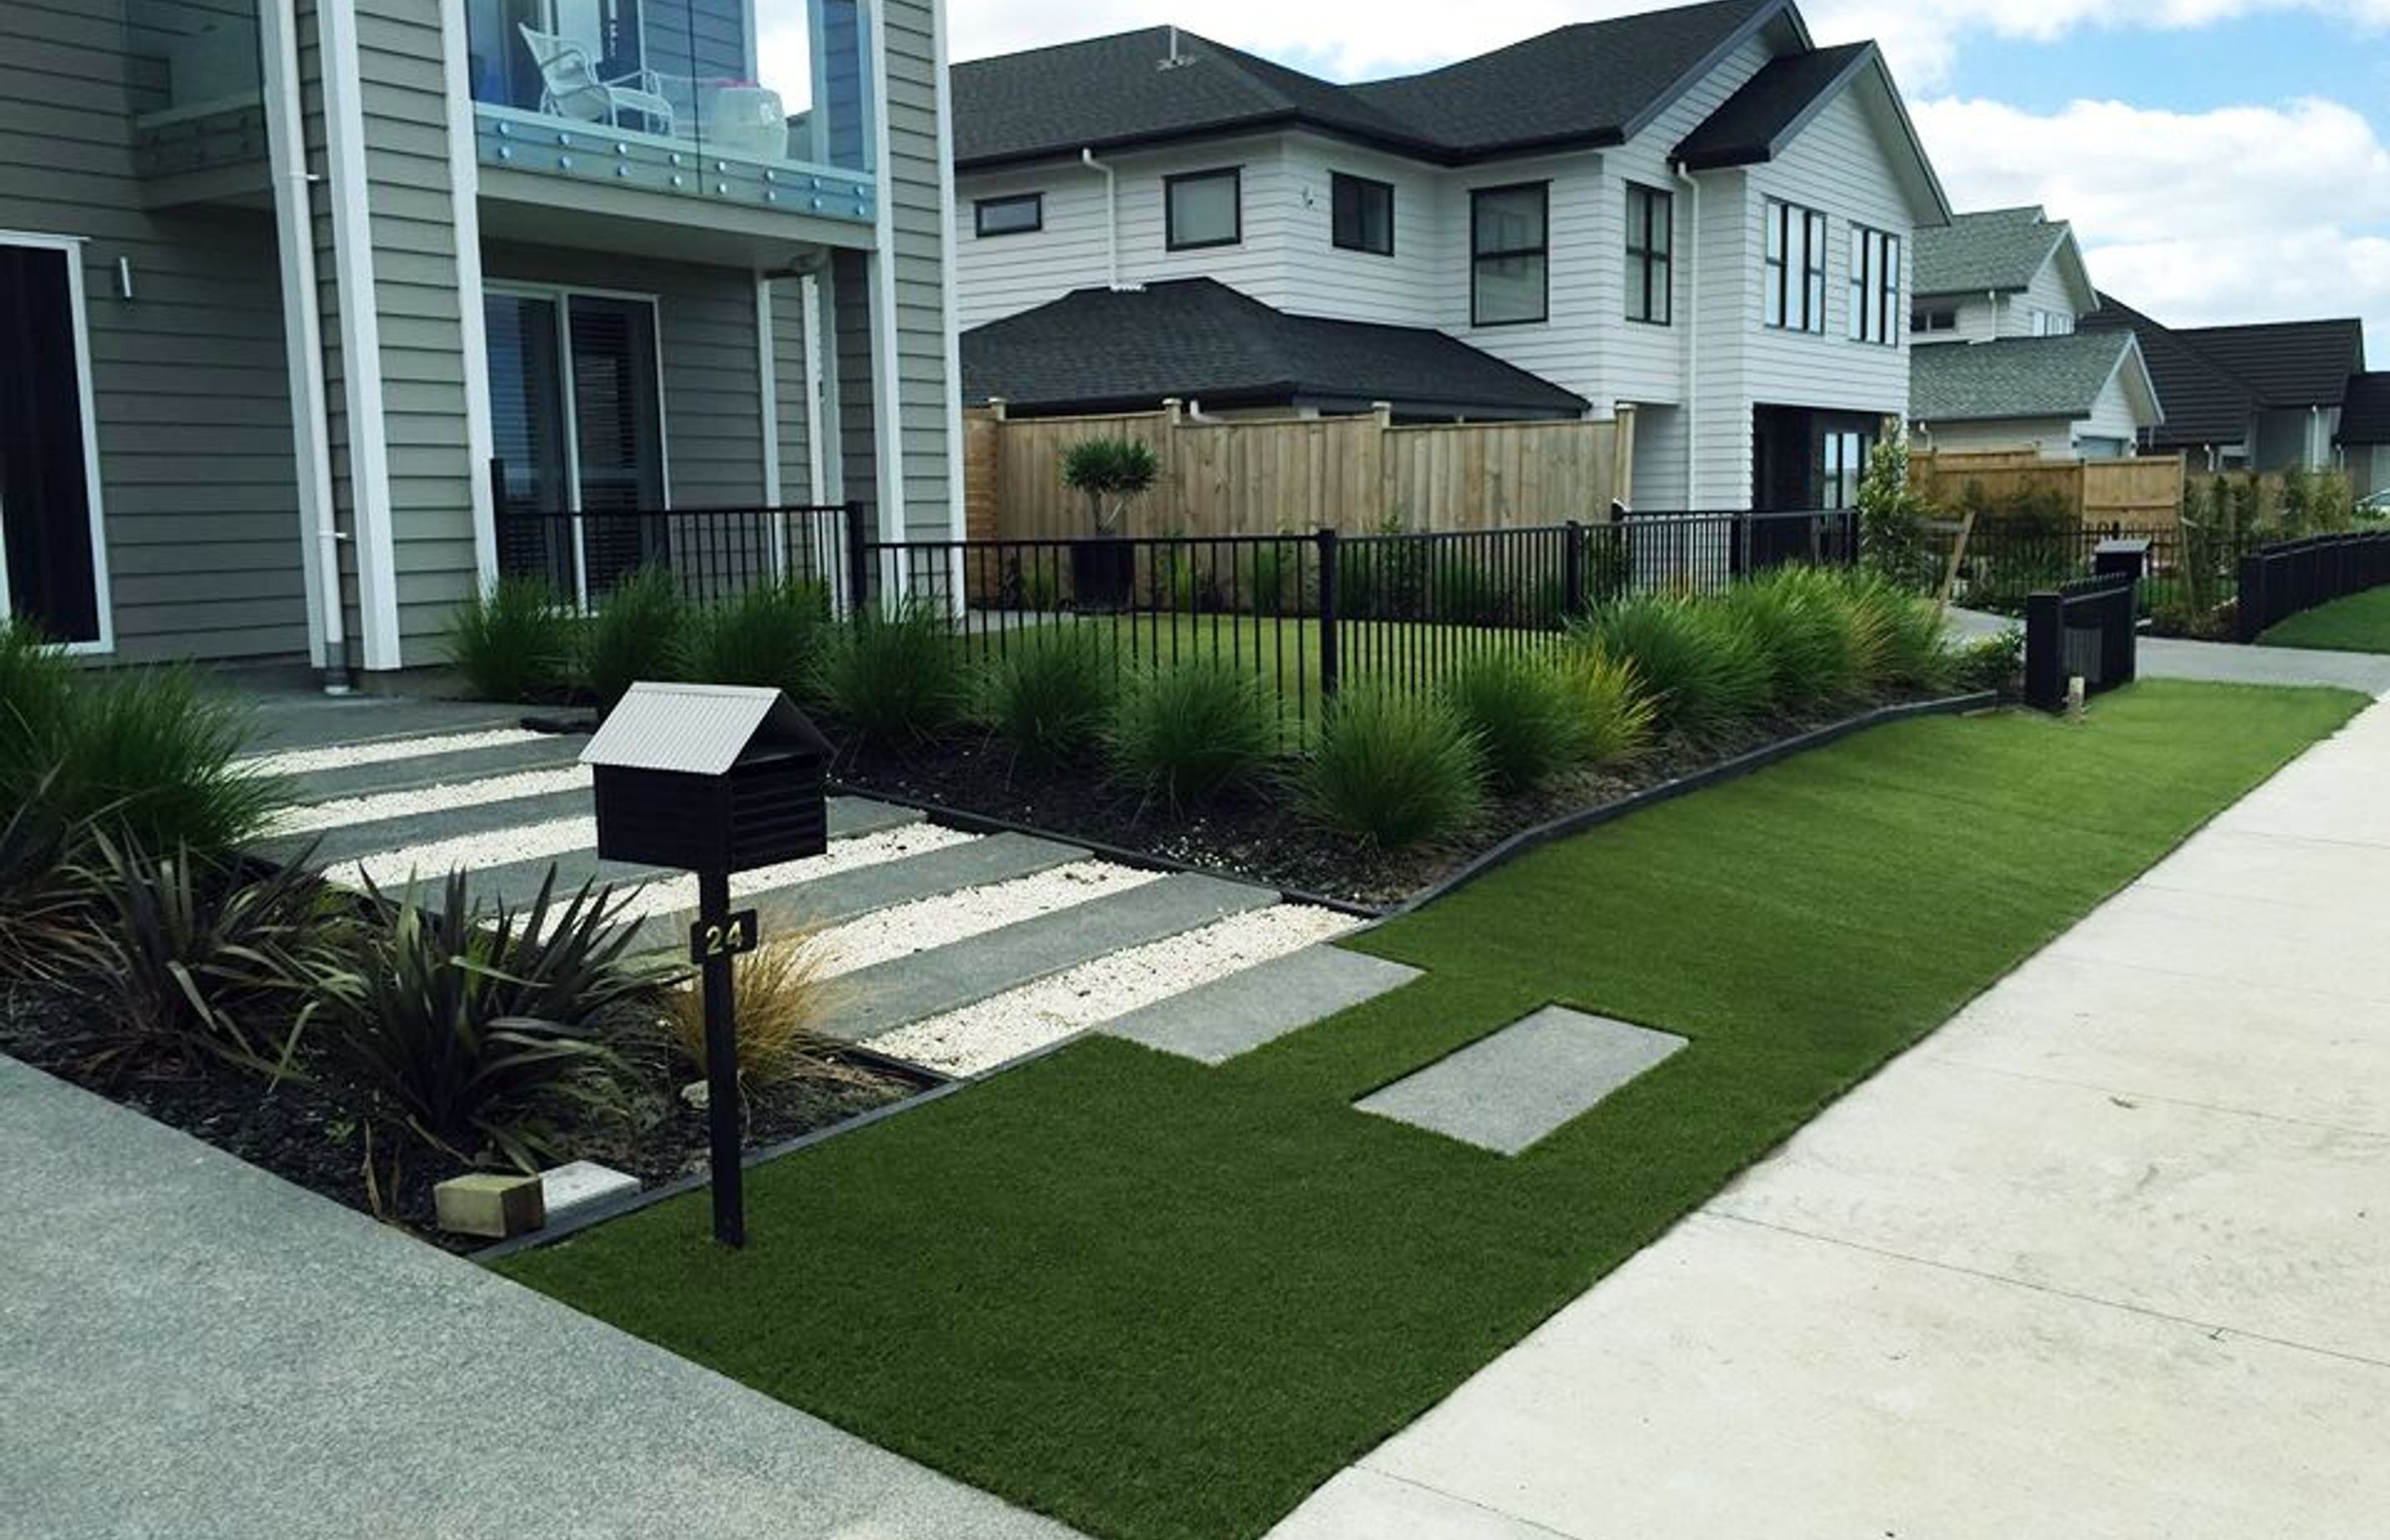 Artifical grass makes an easy and attractive entryway.